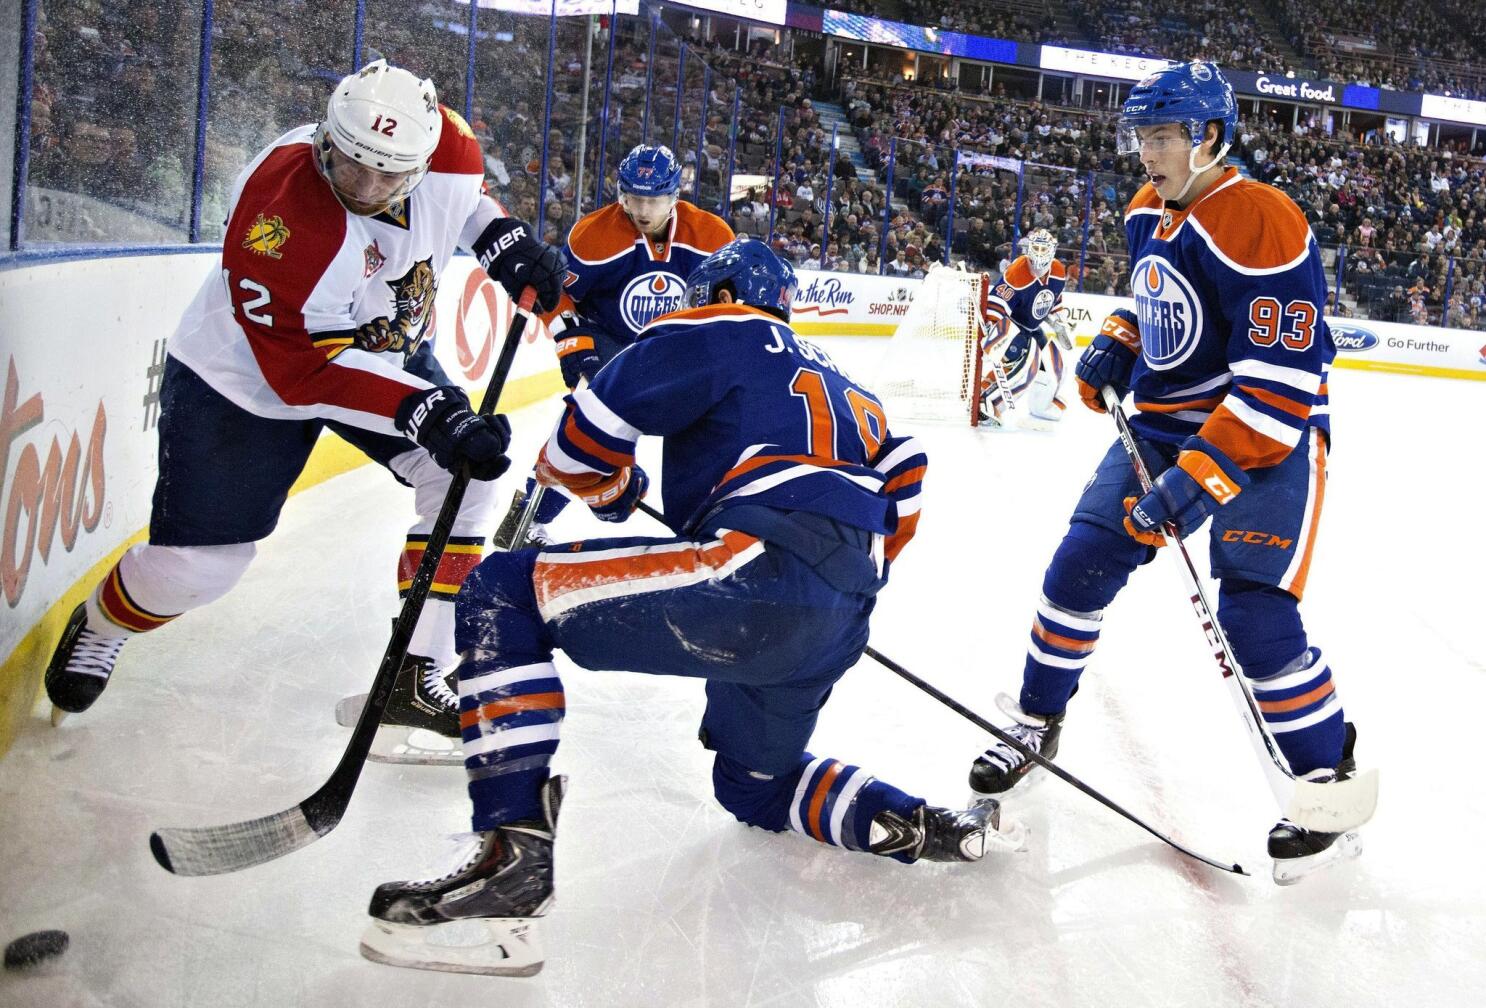 Eberle scores 2 goals for Oilers in NHL debut - The San Diego Union-Tribune